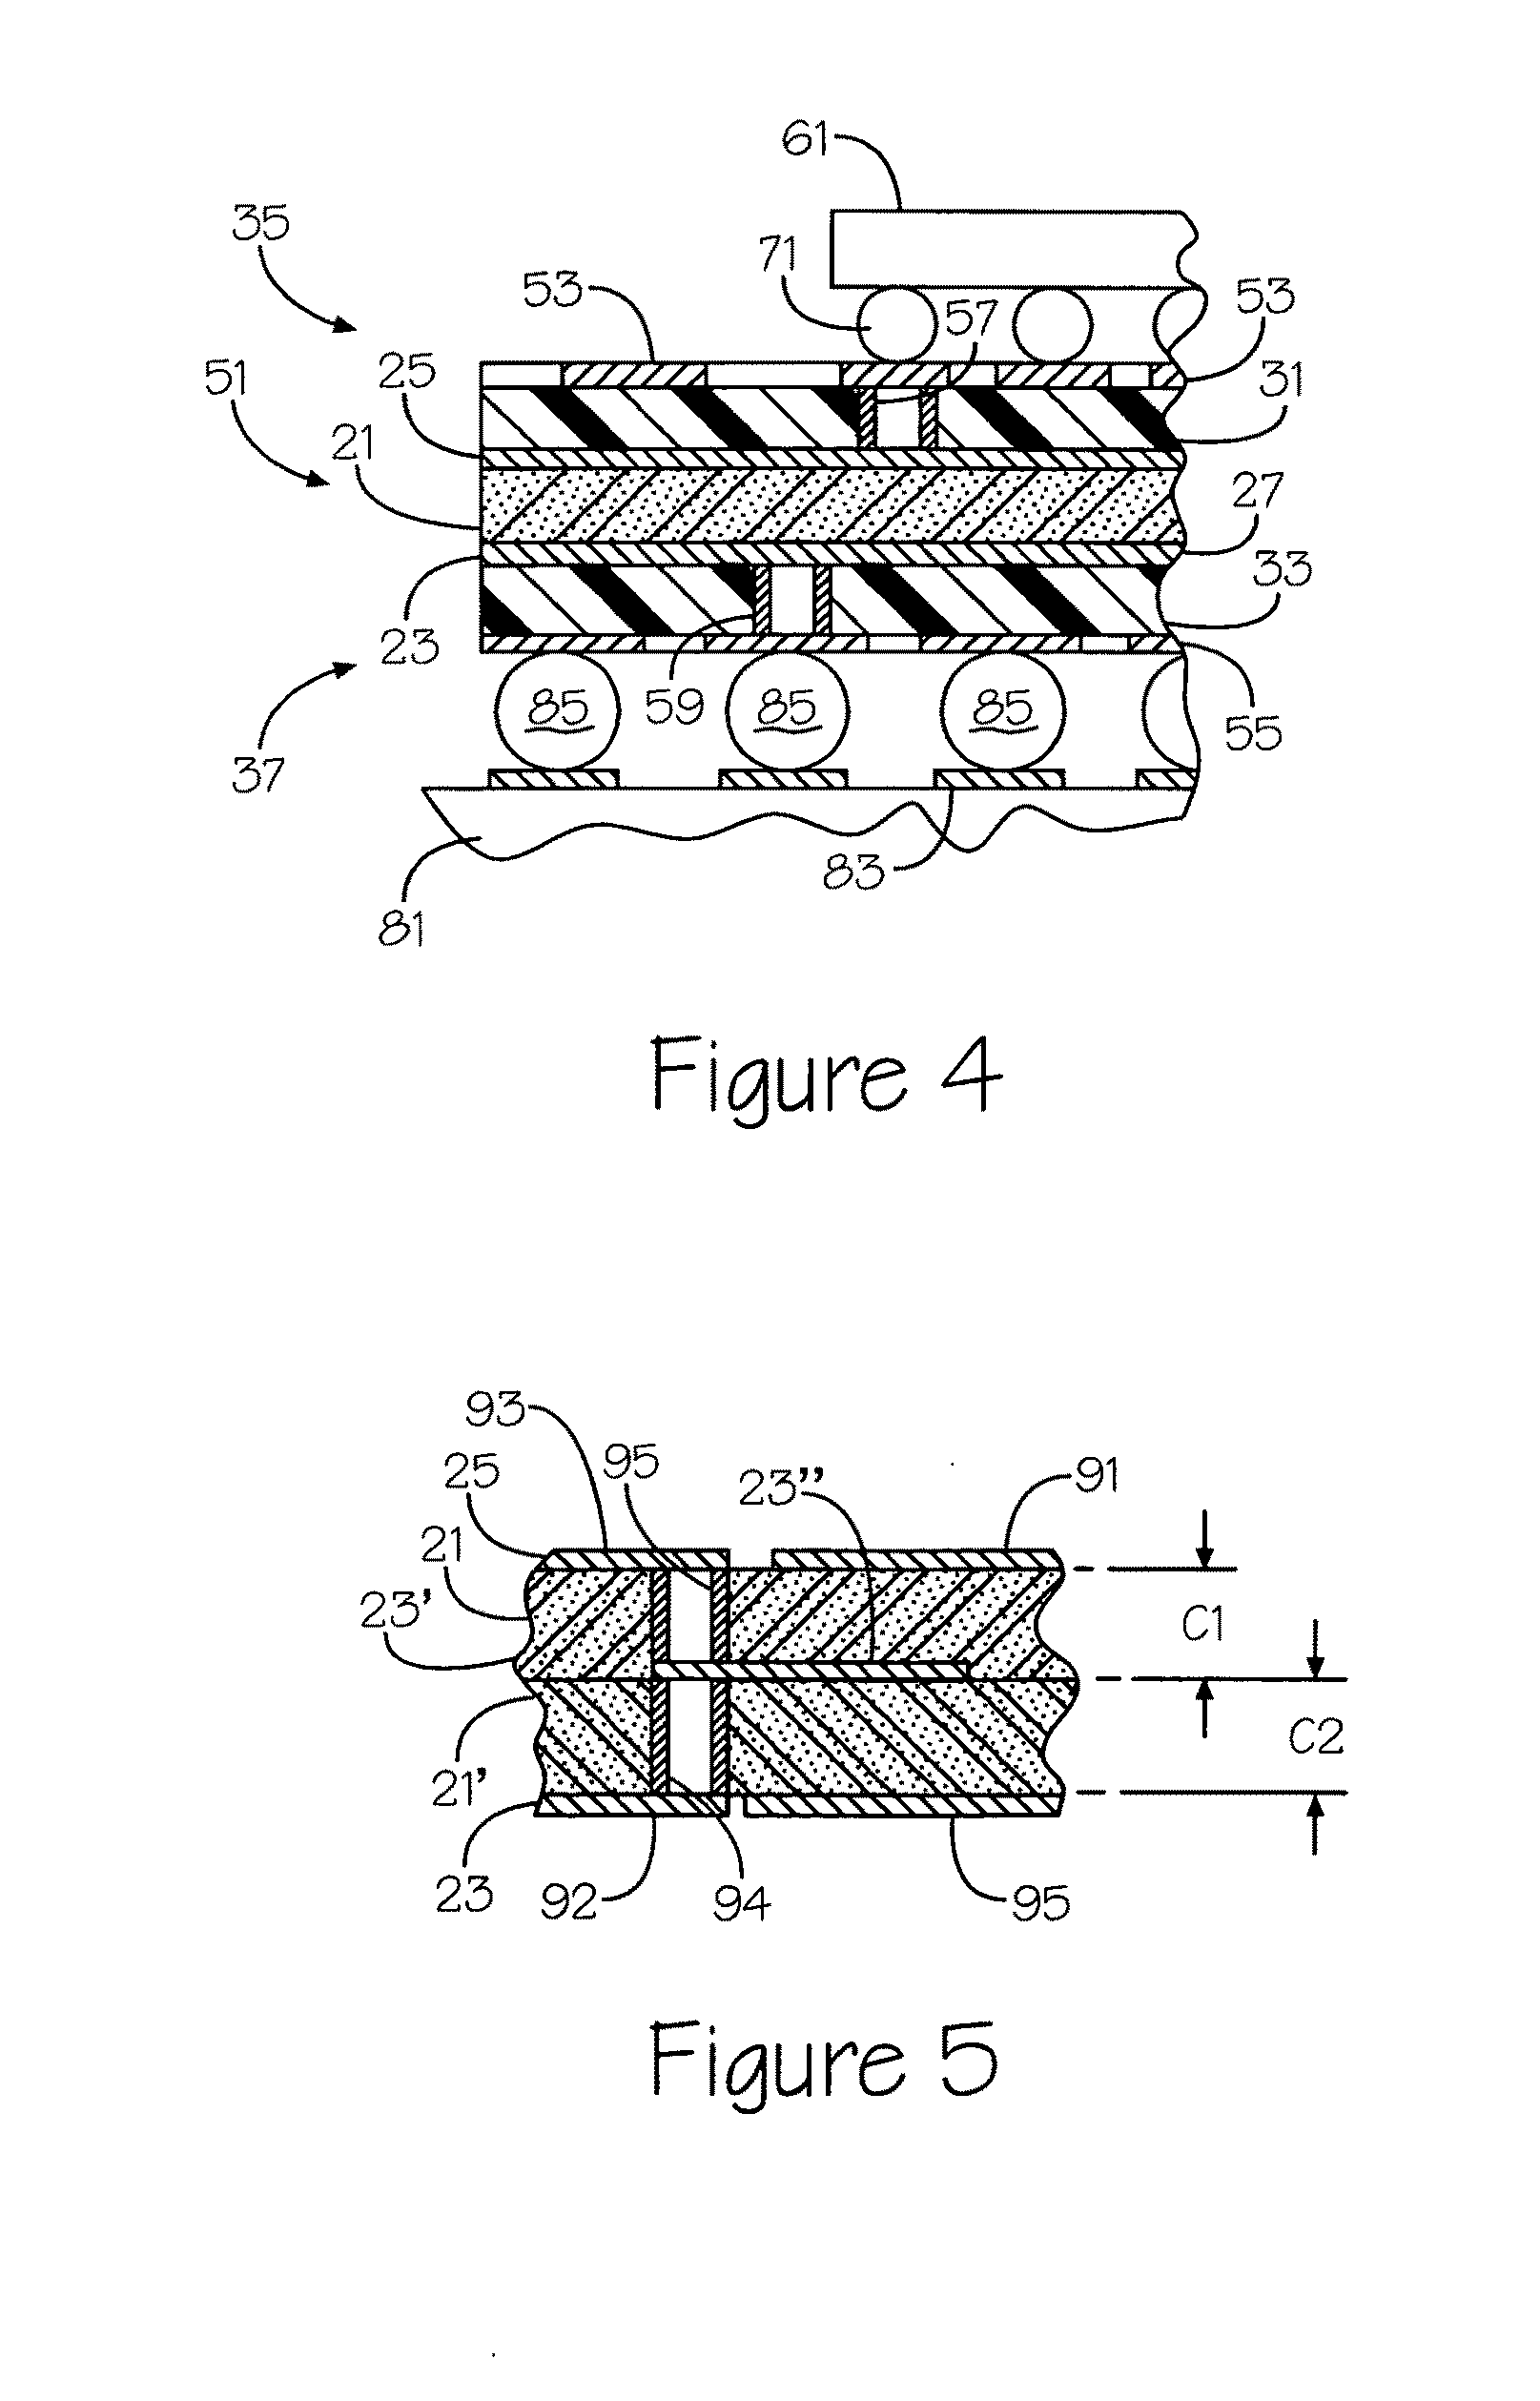 Mulit-layer embedded capacitance and resistance substrate core